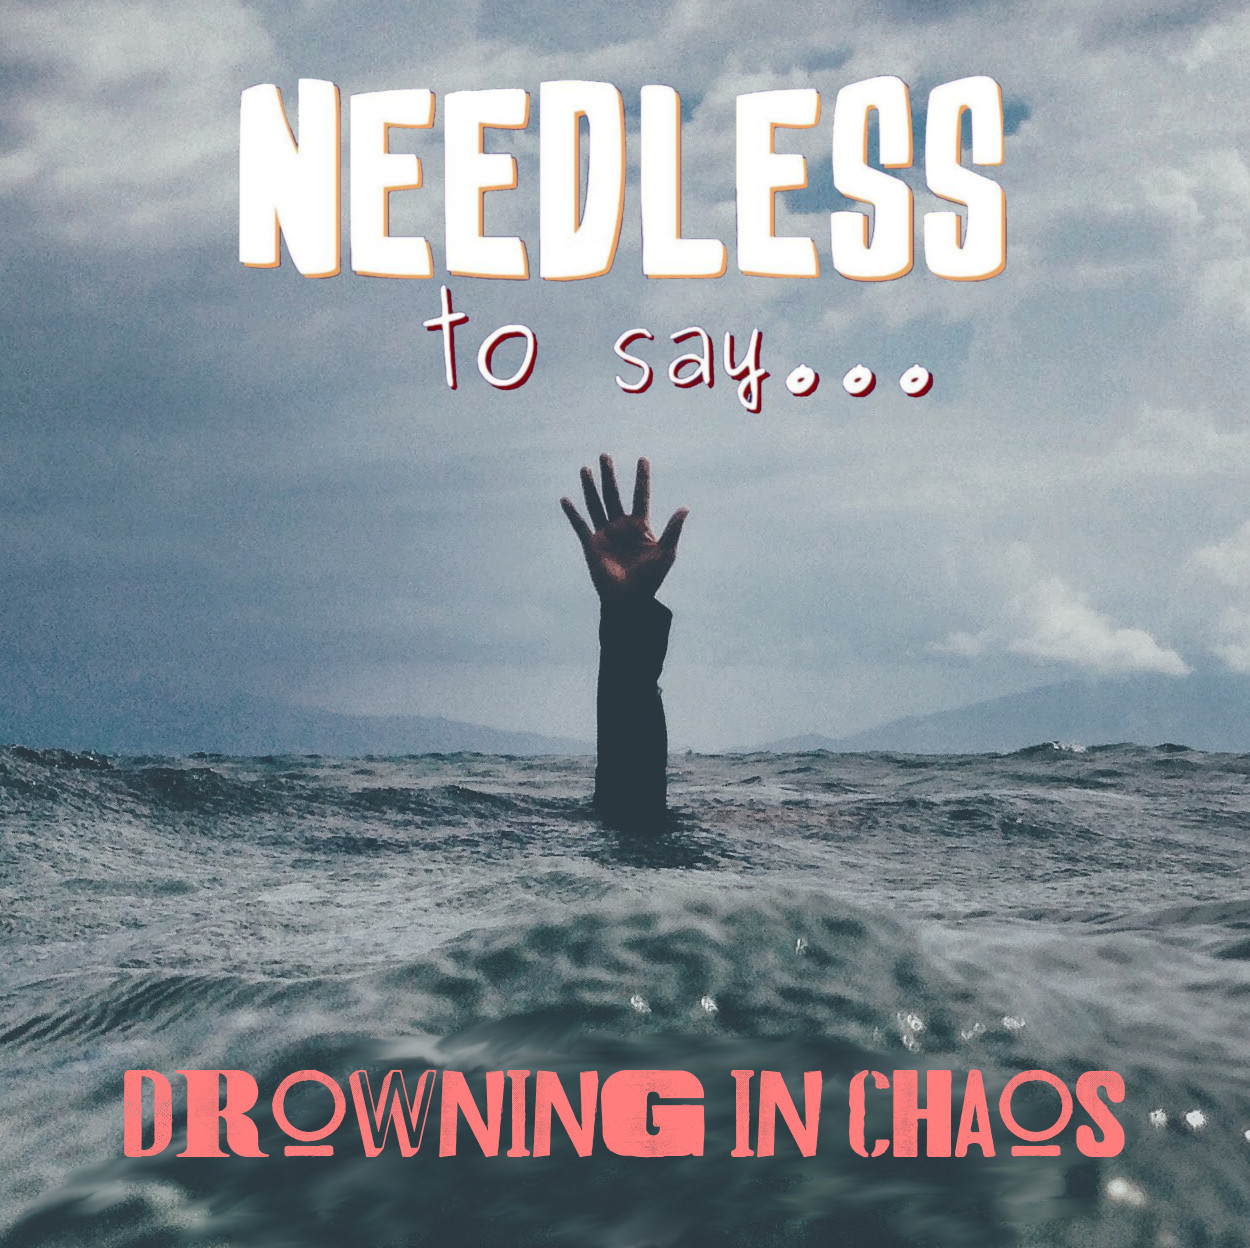 Drowning in Chaos